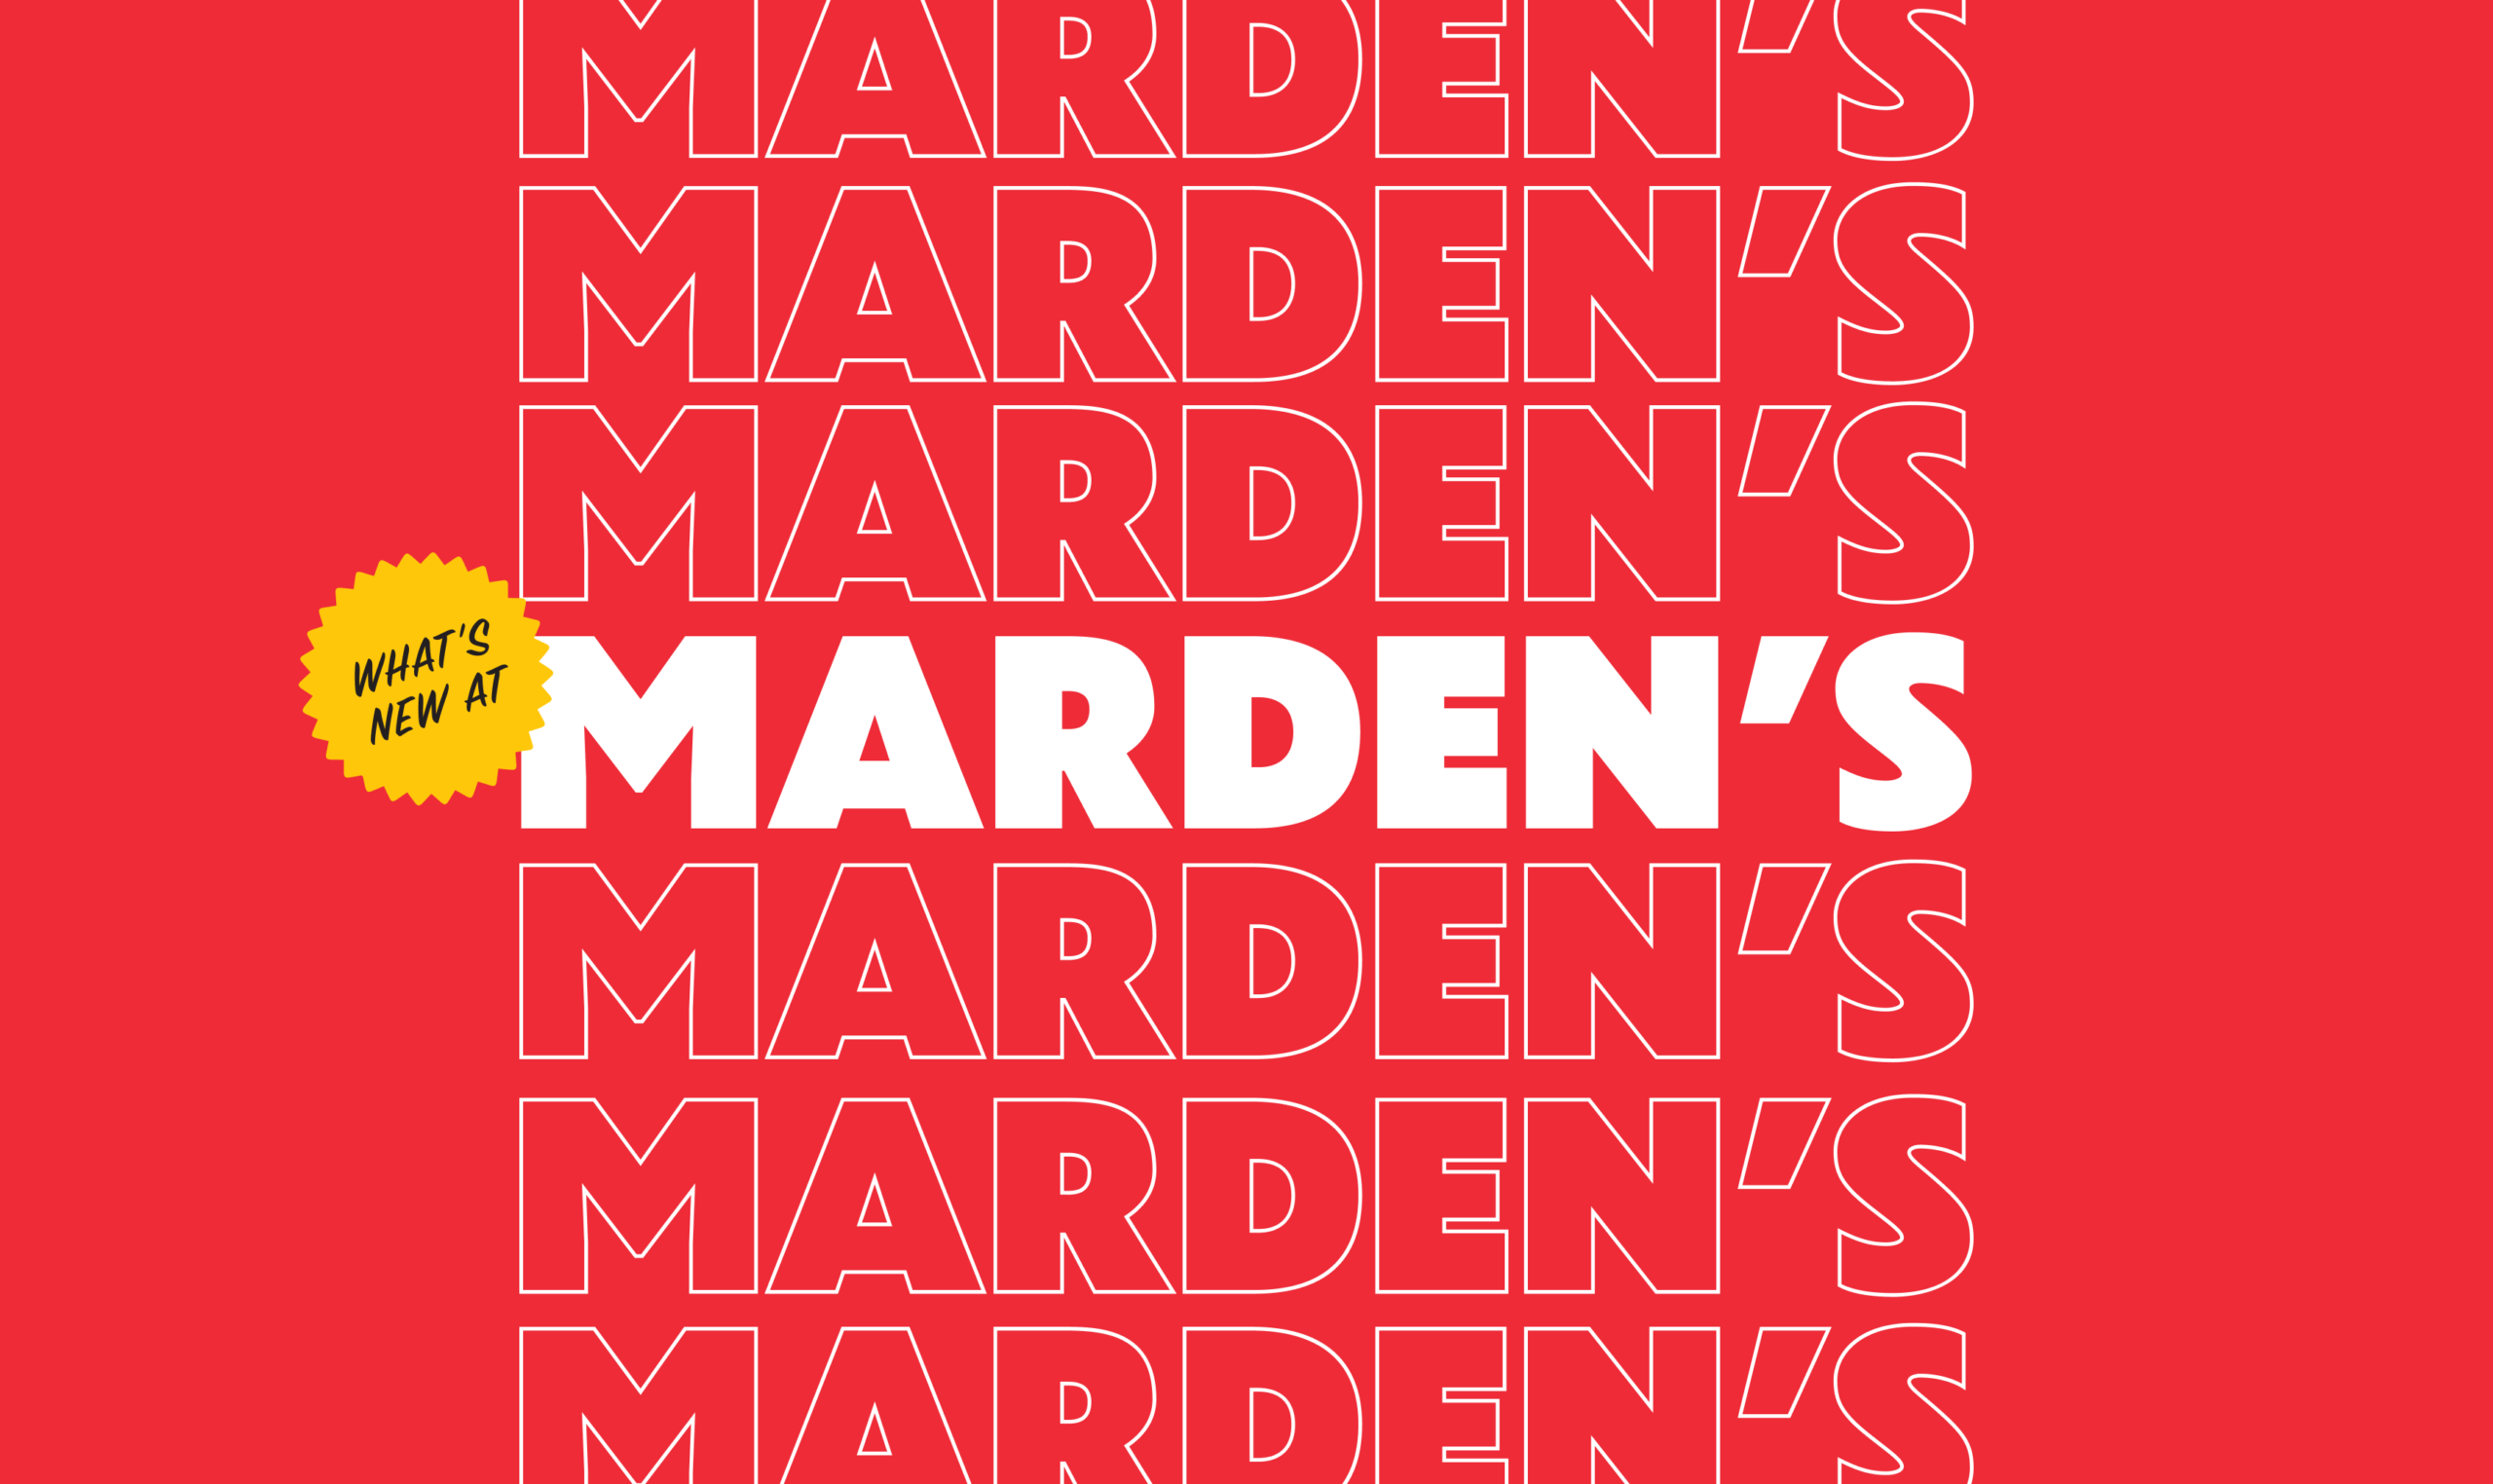 White Marden's logo repeated in a vertical stack on a red background